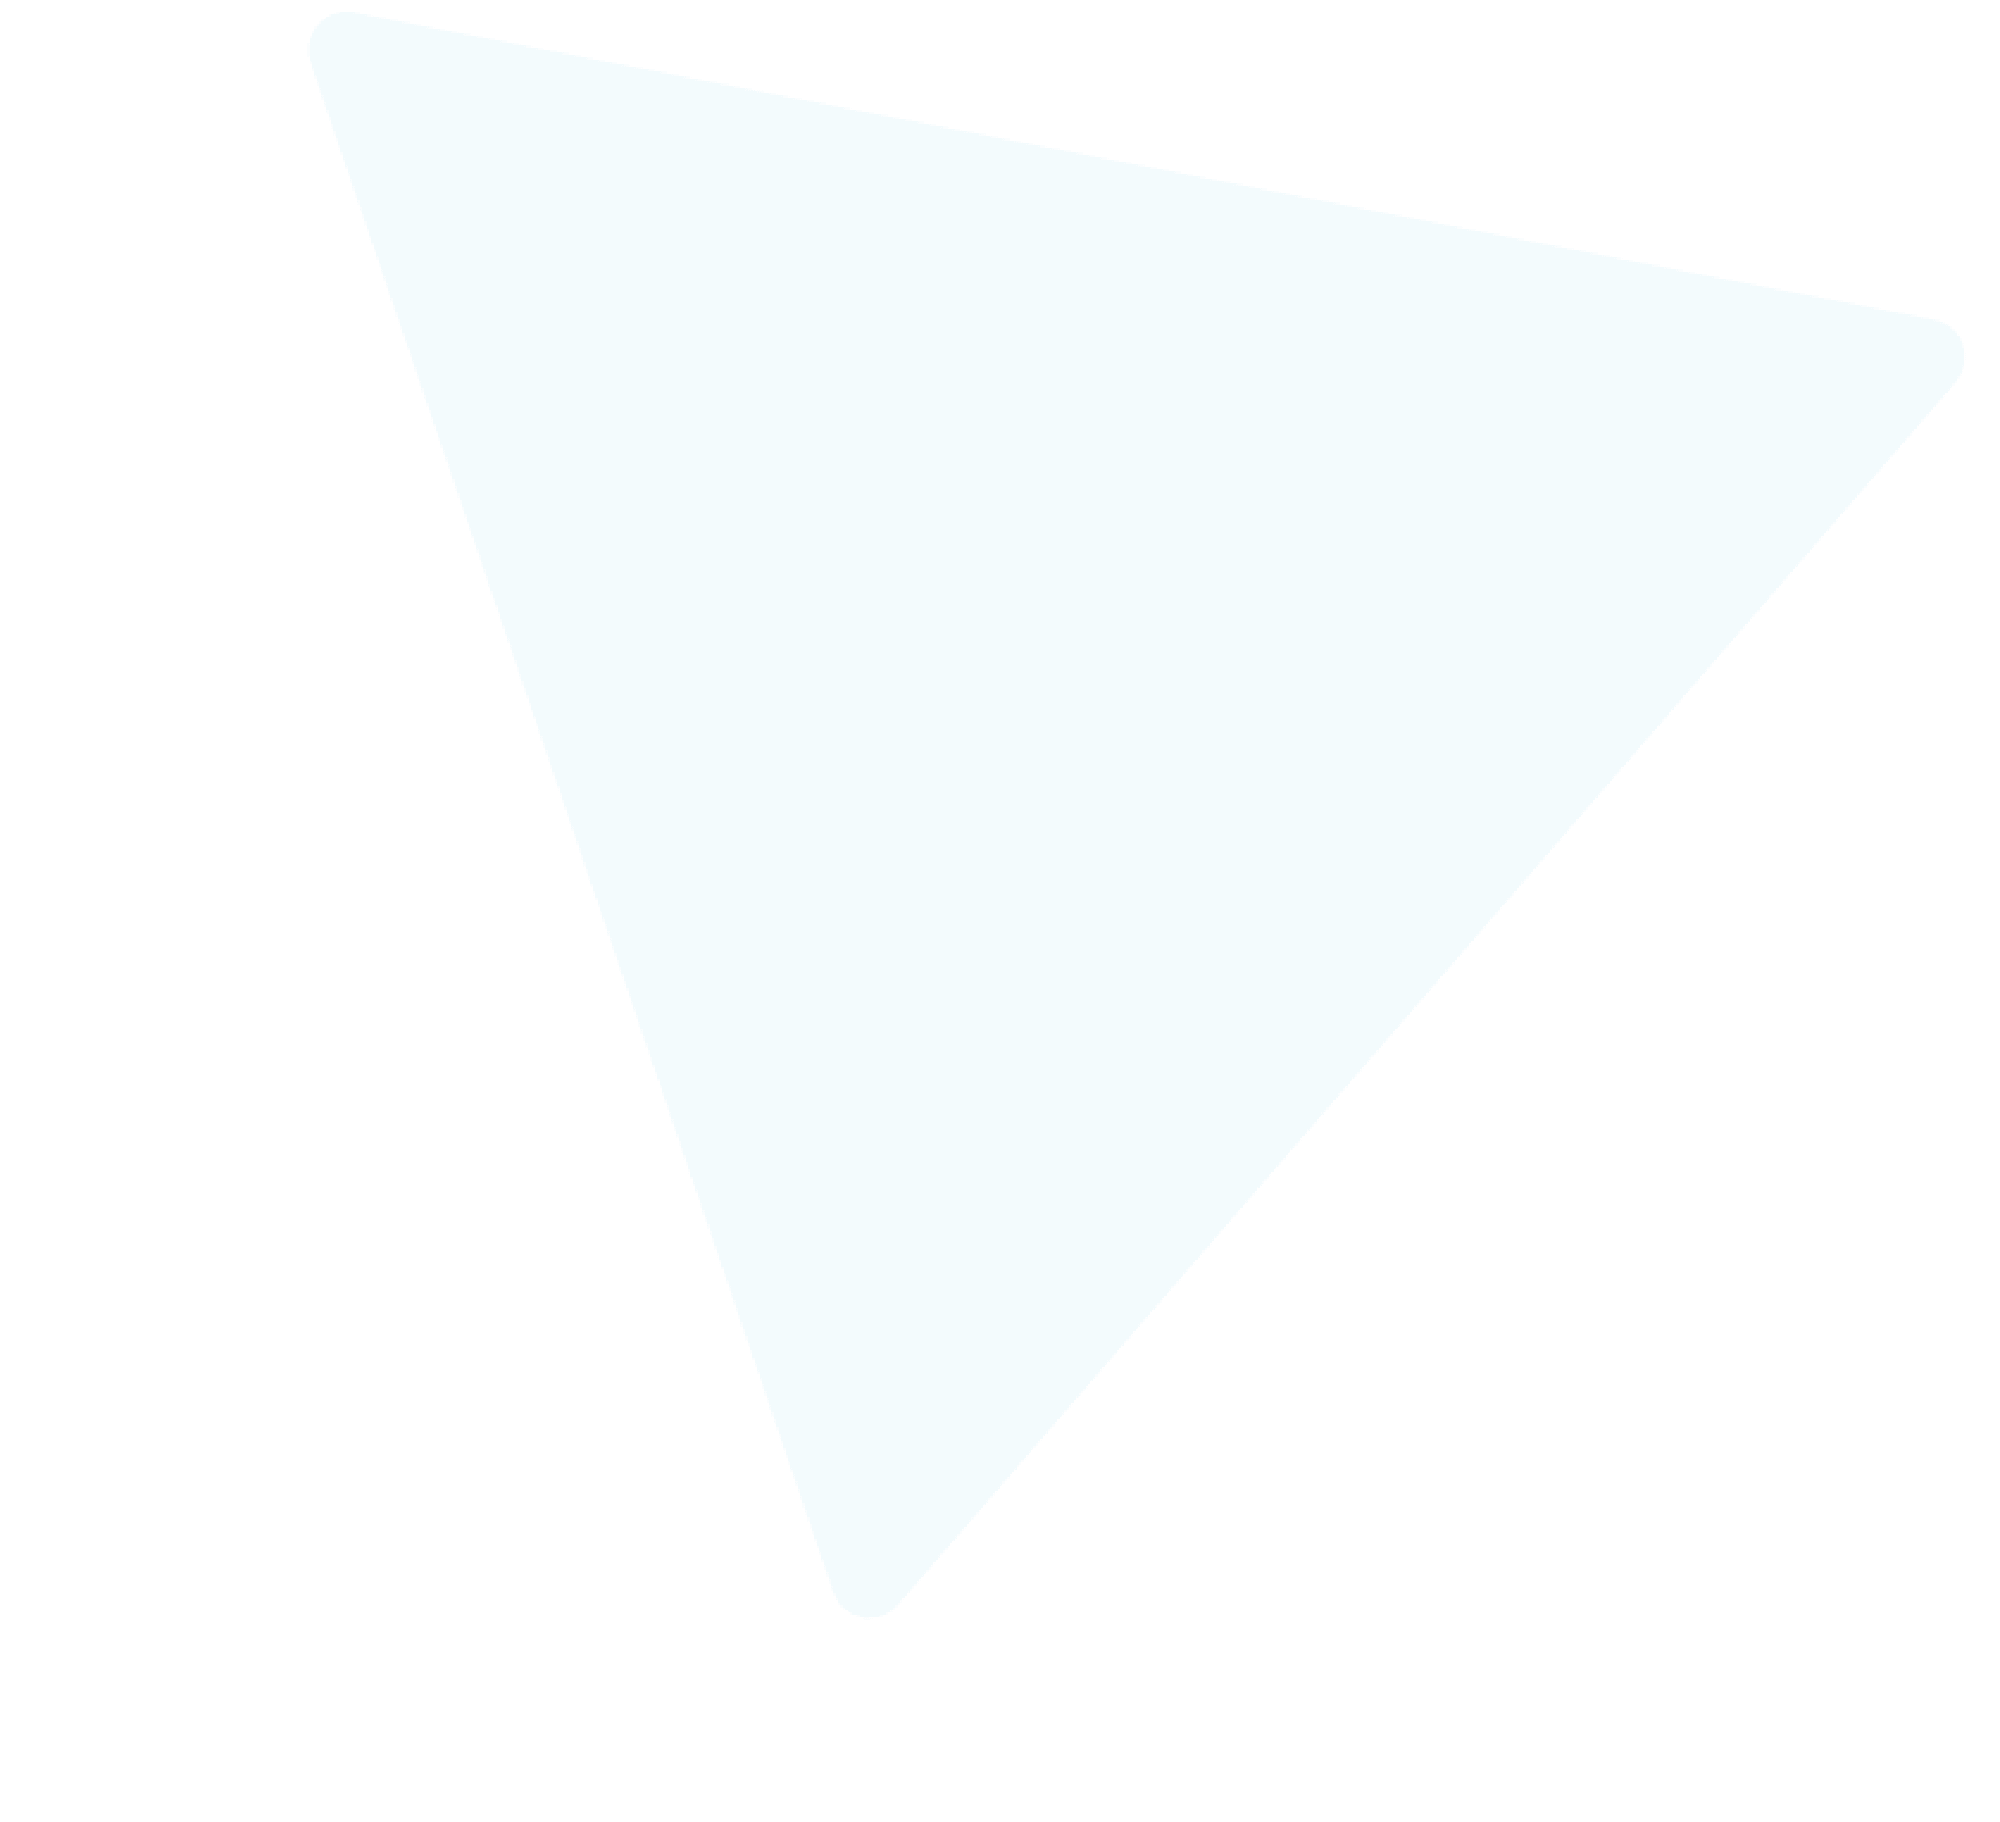 Triangular Light-Blue Background Image Between Section Transition